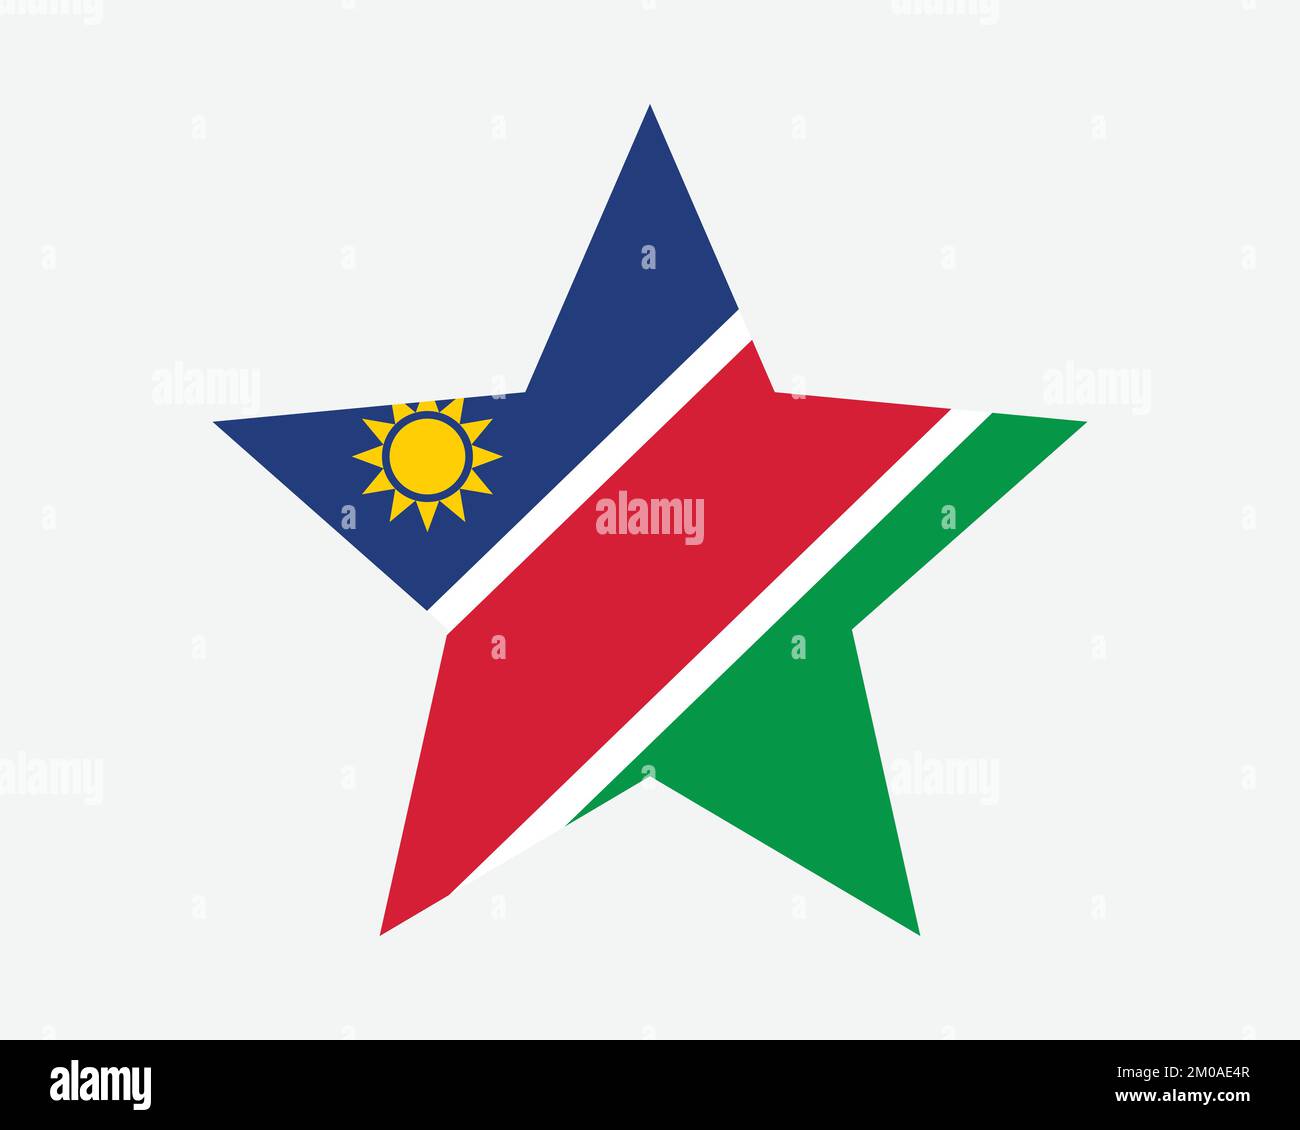 Namibia Star Flag. Namibian Star Shape Flag. Republic of Namibia Country National Banner Icon Symbol Vector Flat Artwork Graphic Illustration Stock Vector